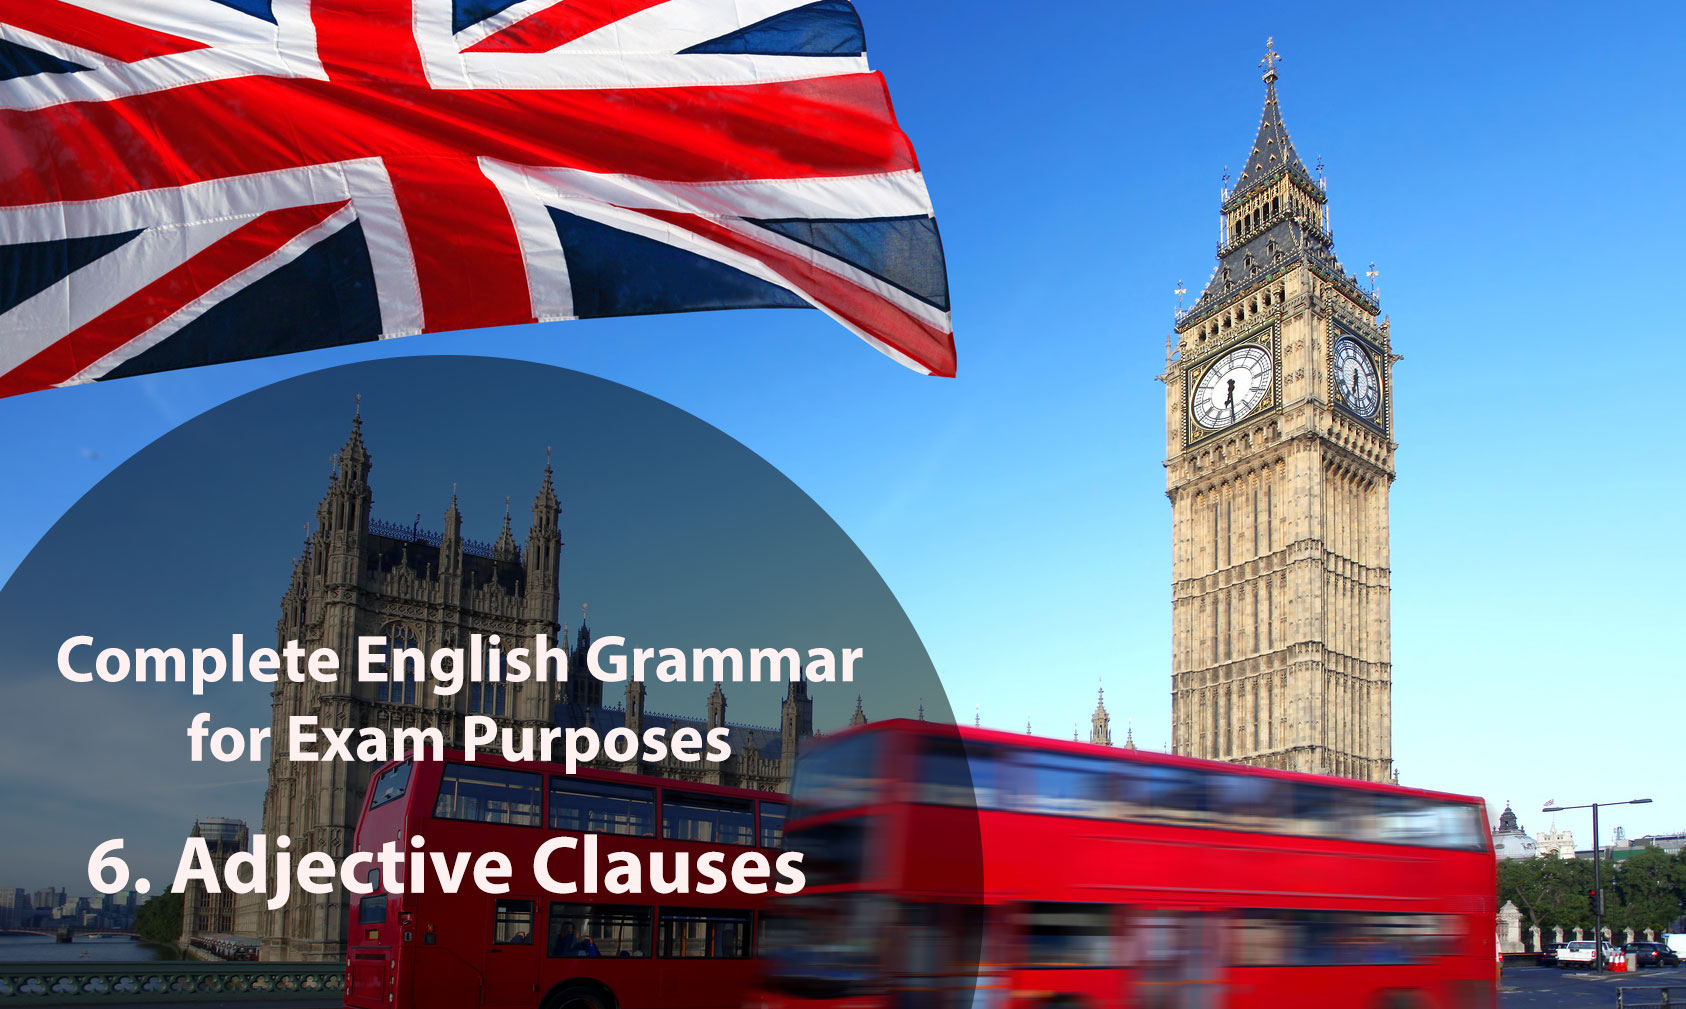 Complete English Grammar Part 6: Adjective Clauses (Relative Clauses)